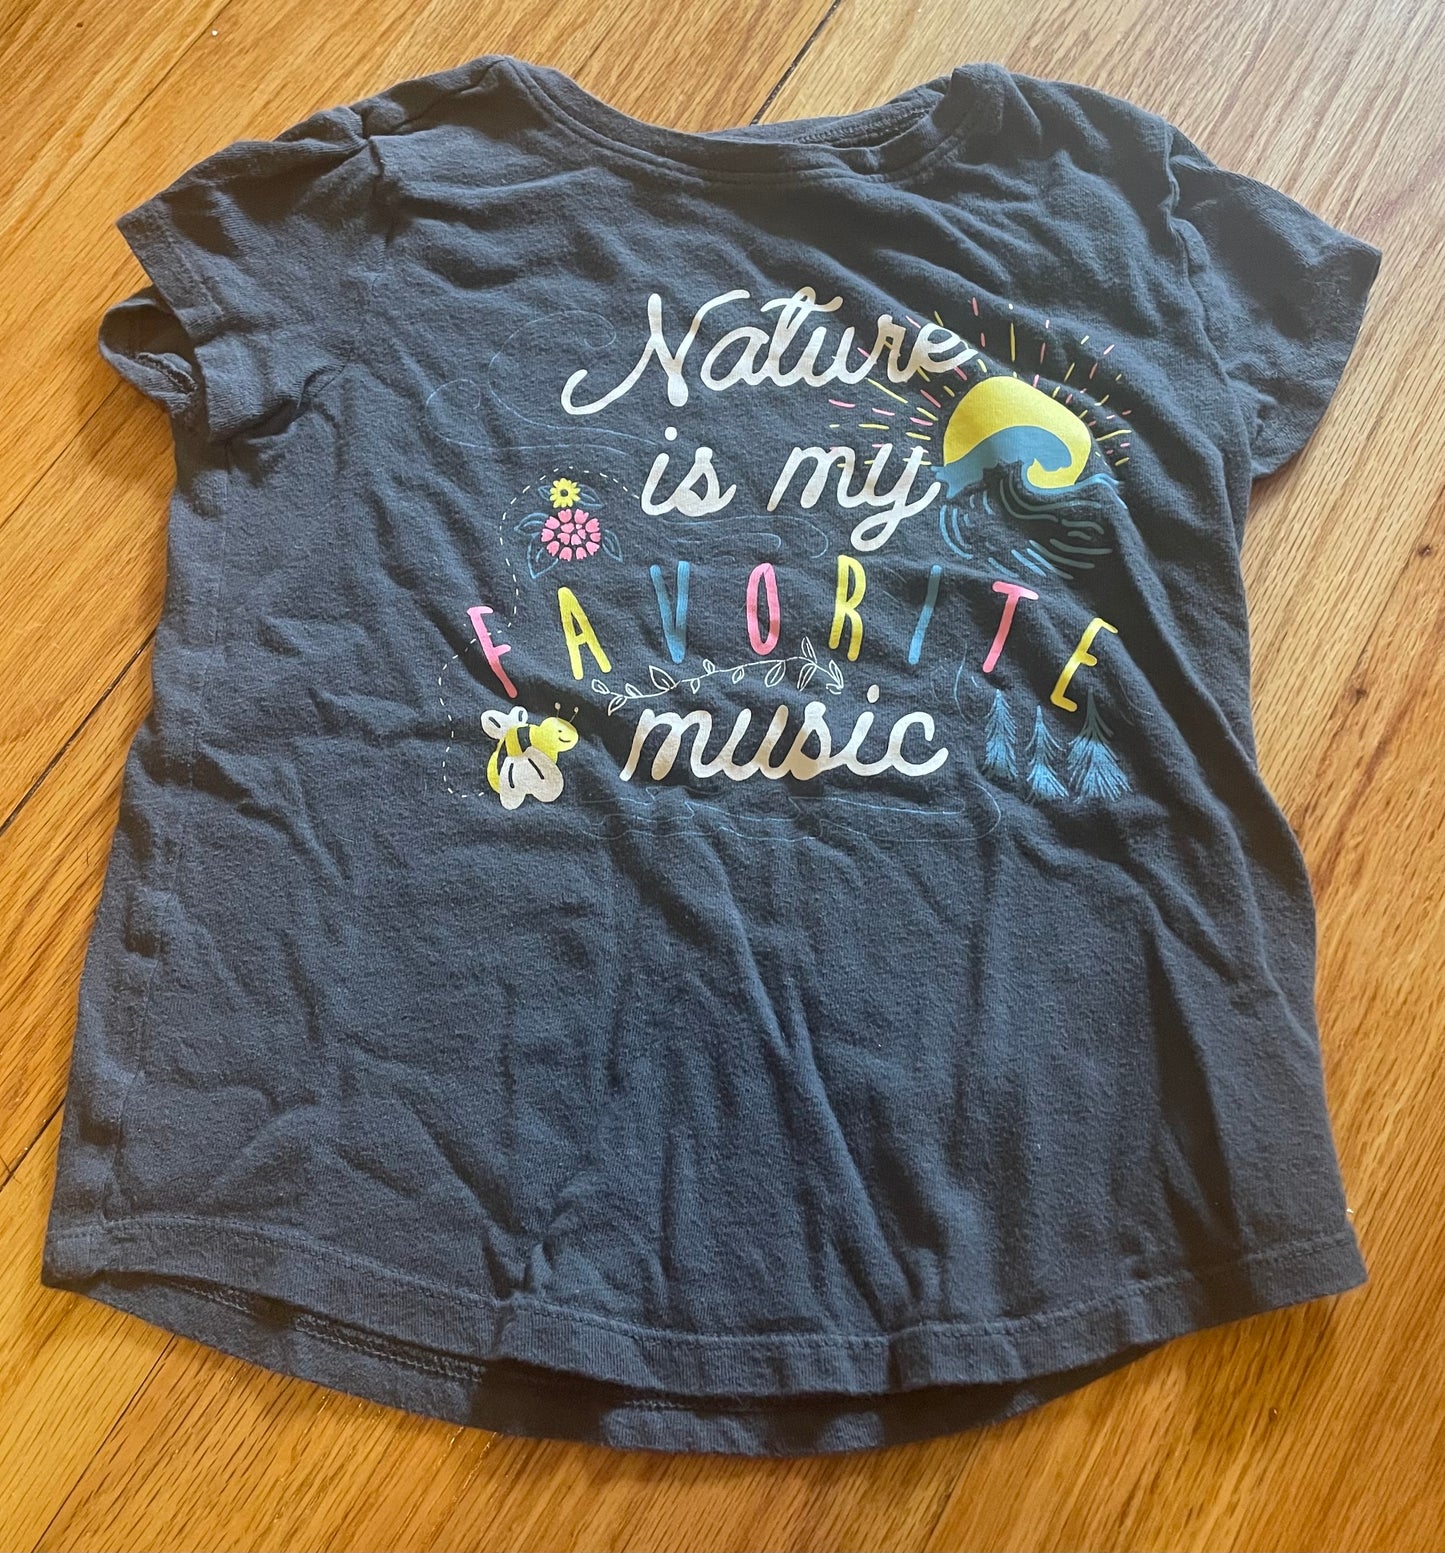 Size 5 - Old Navy - shirt